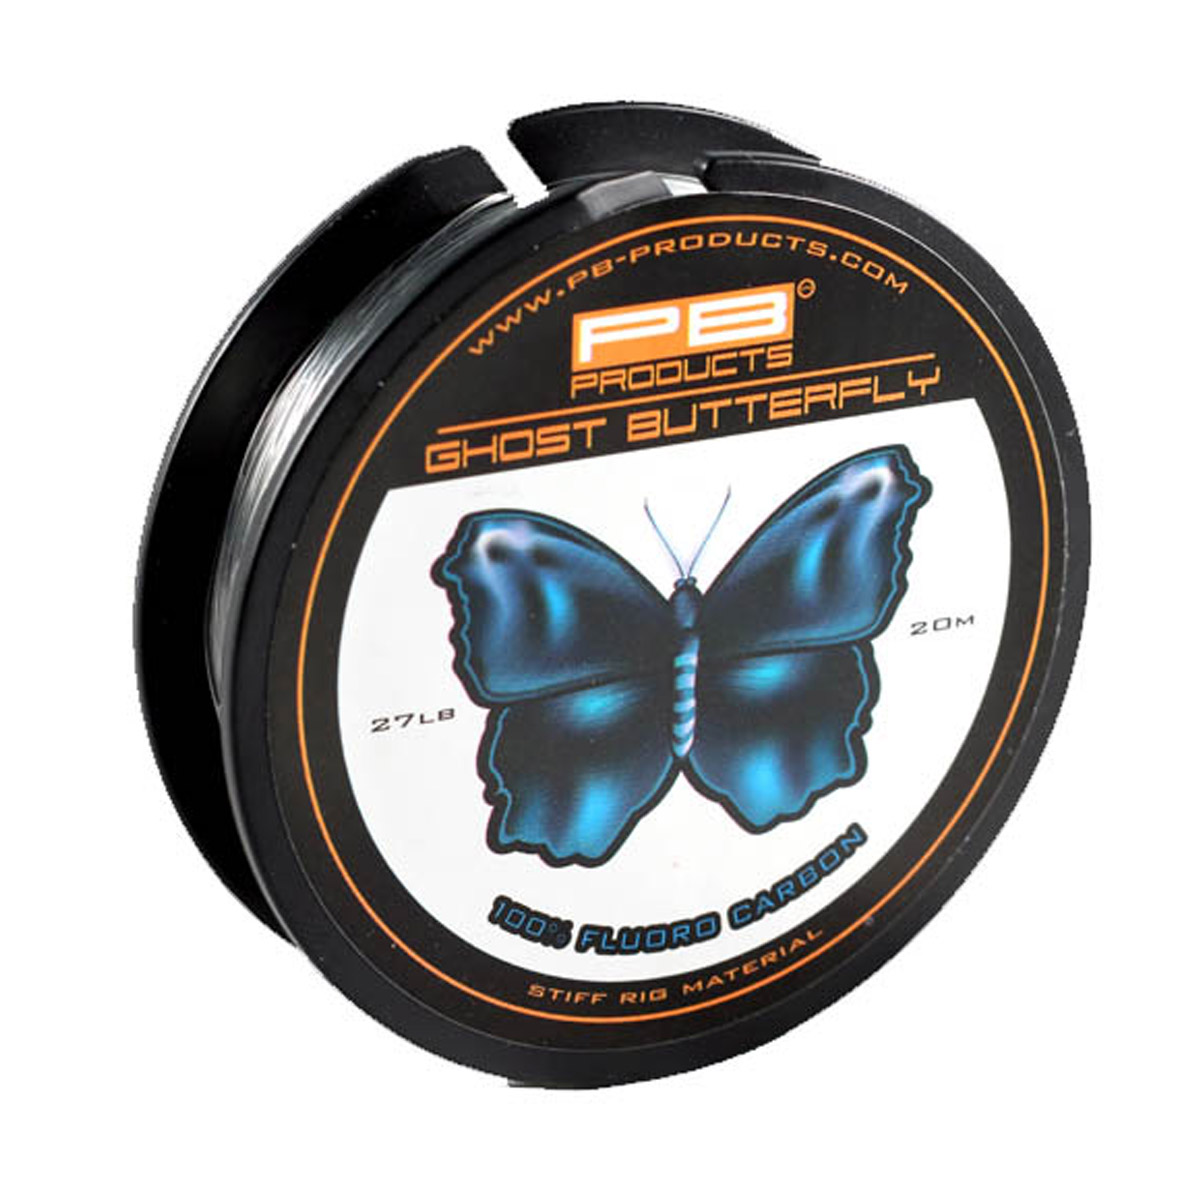 PB Products Ghost Butterfly Fluoro Corbon 27lb